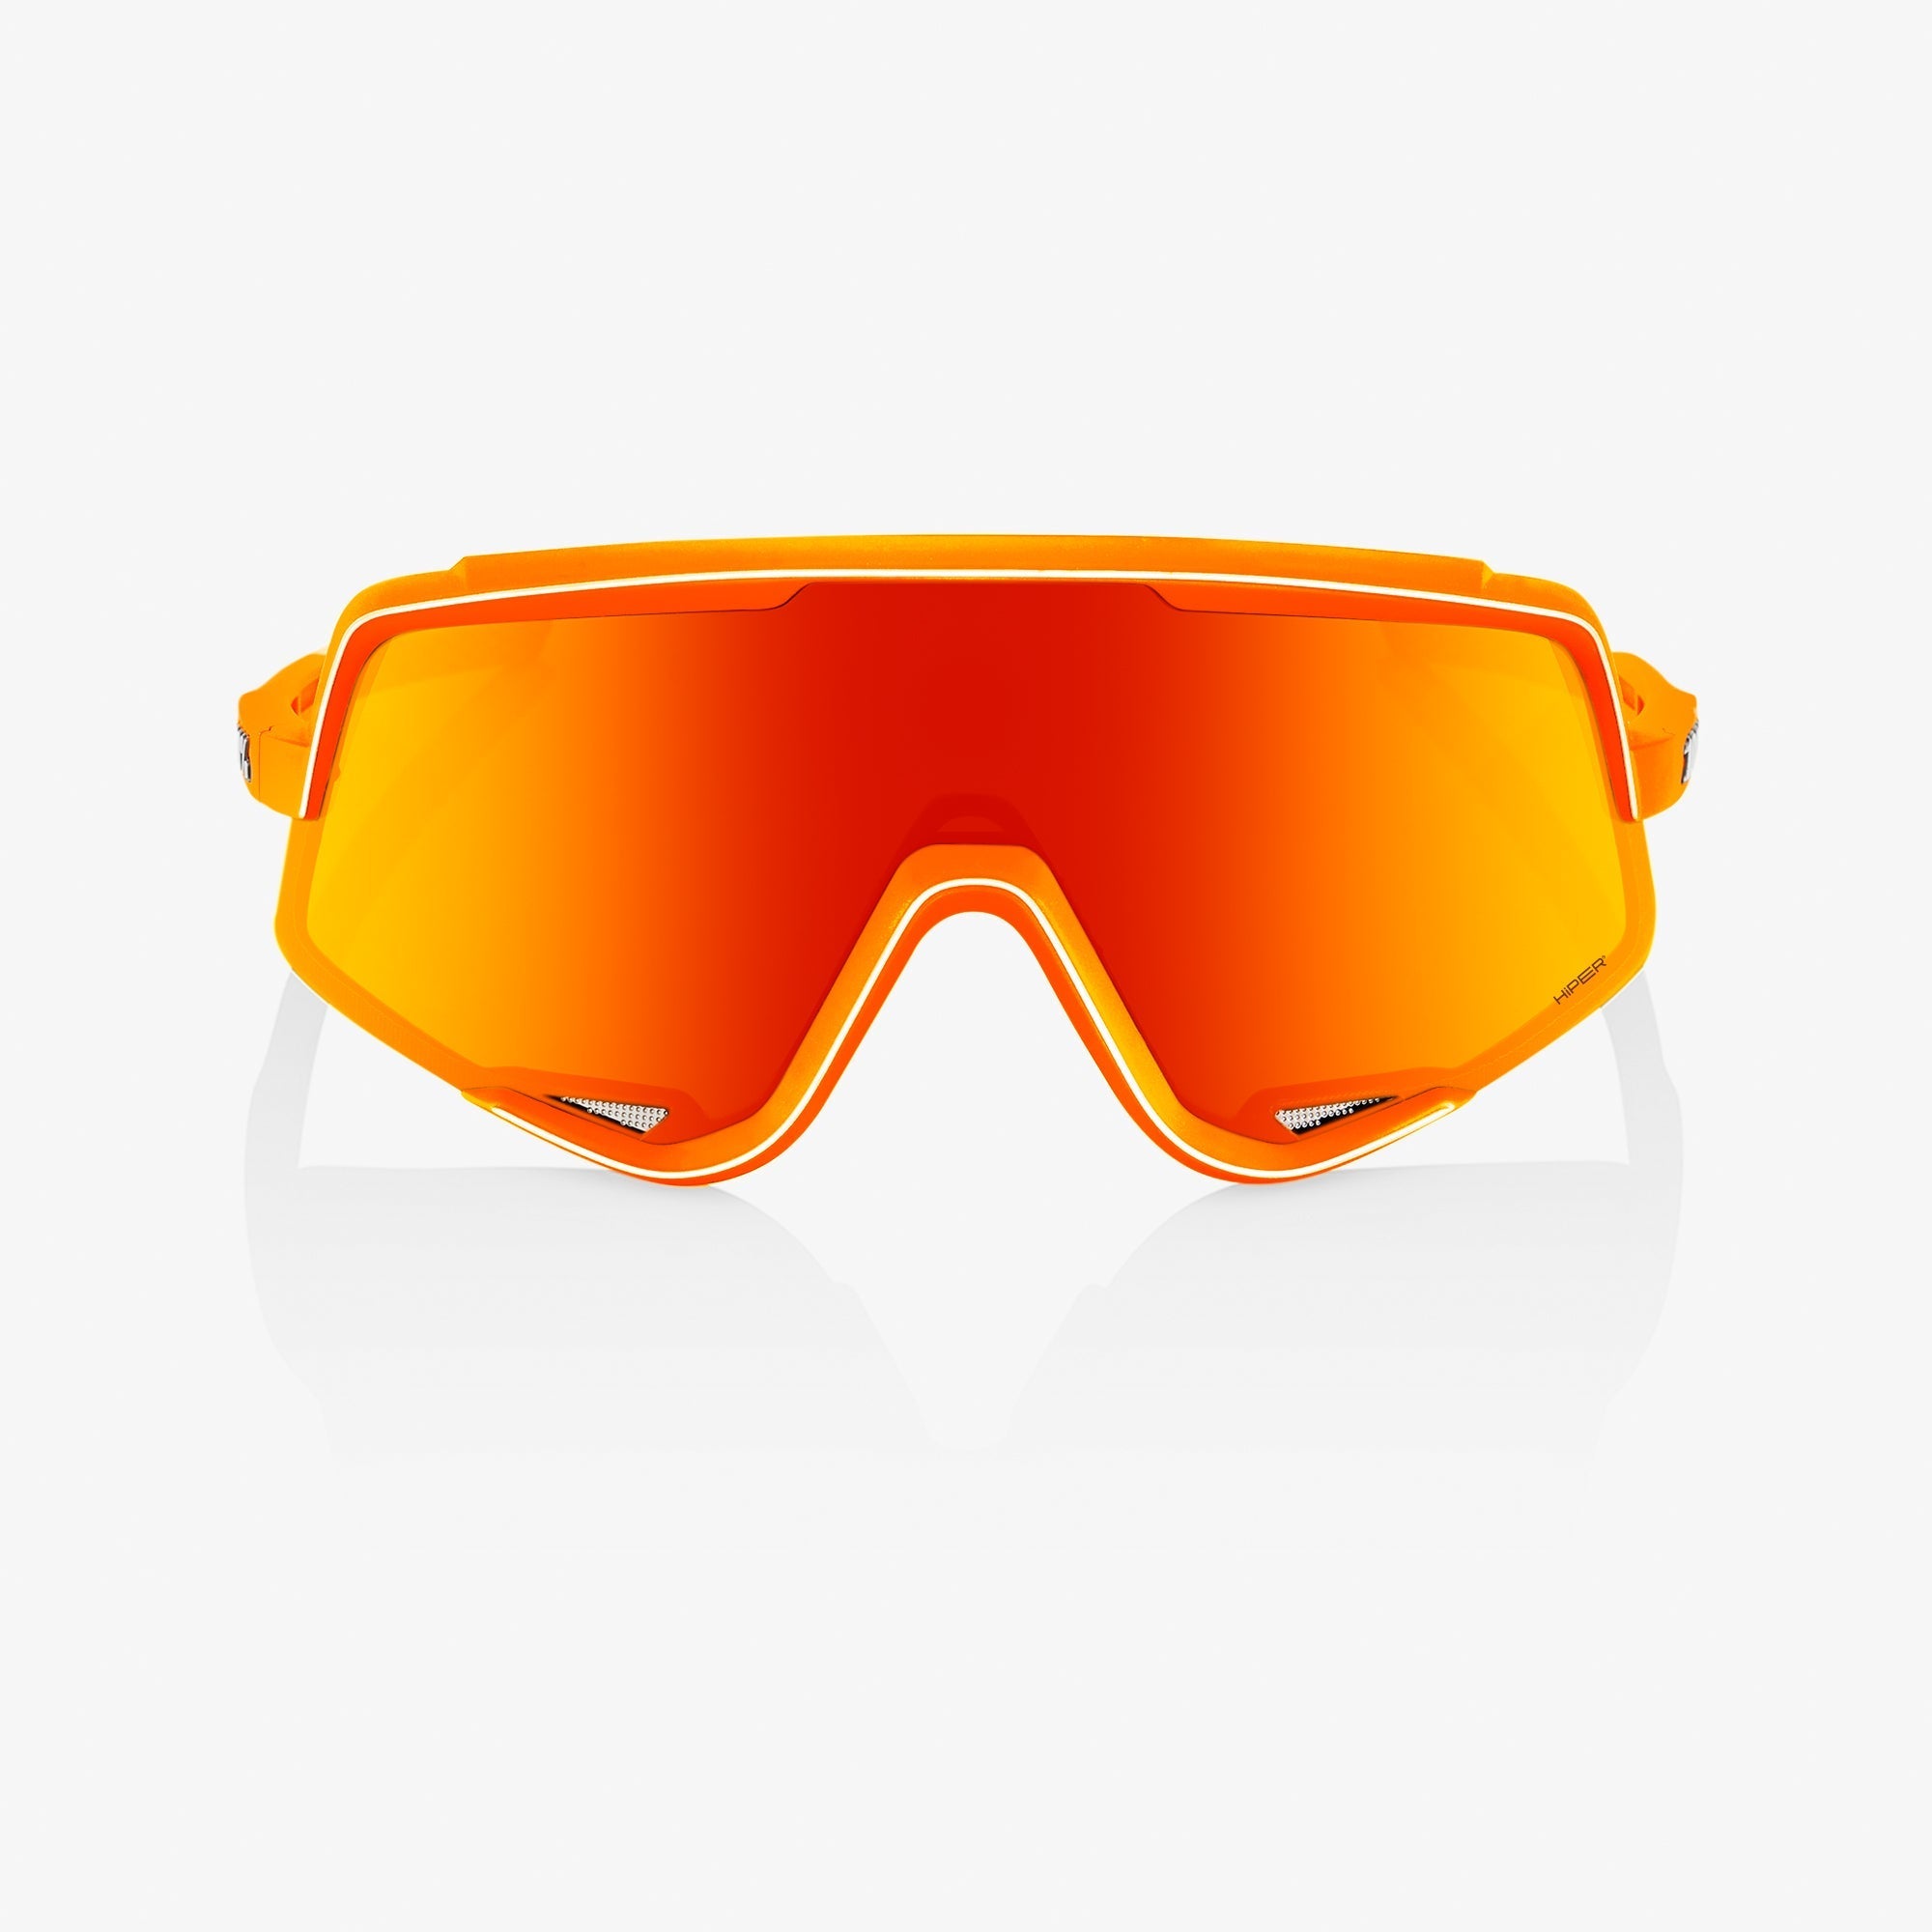 GLENDALE - Soft Tact Neon Orange - HiPER Red Multilayer Mirror Lens - Secondary